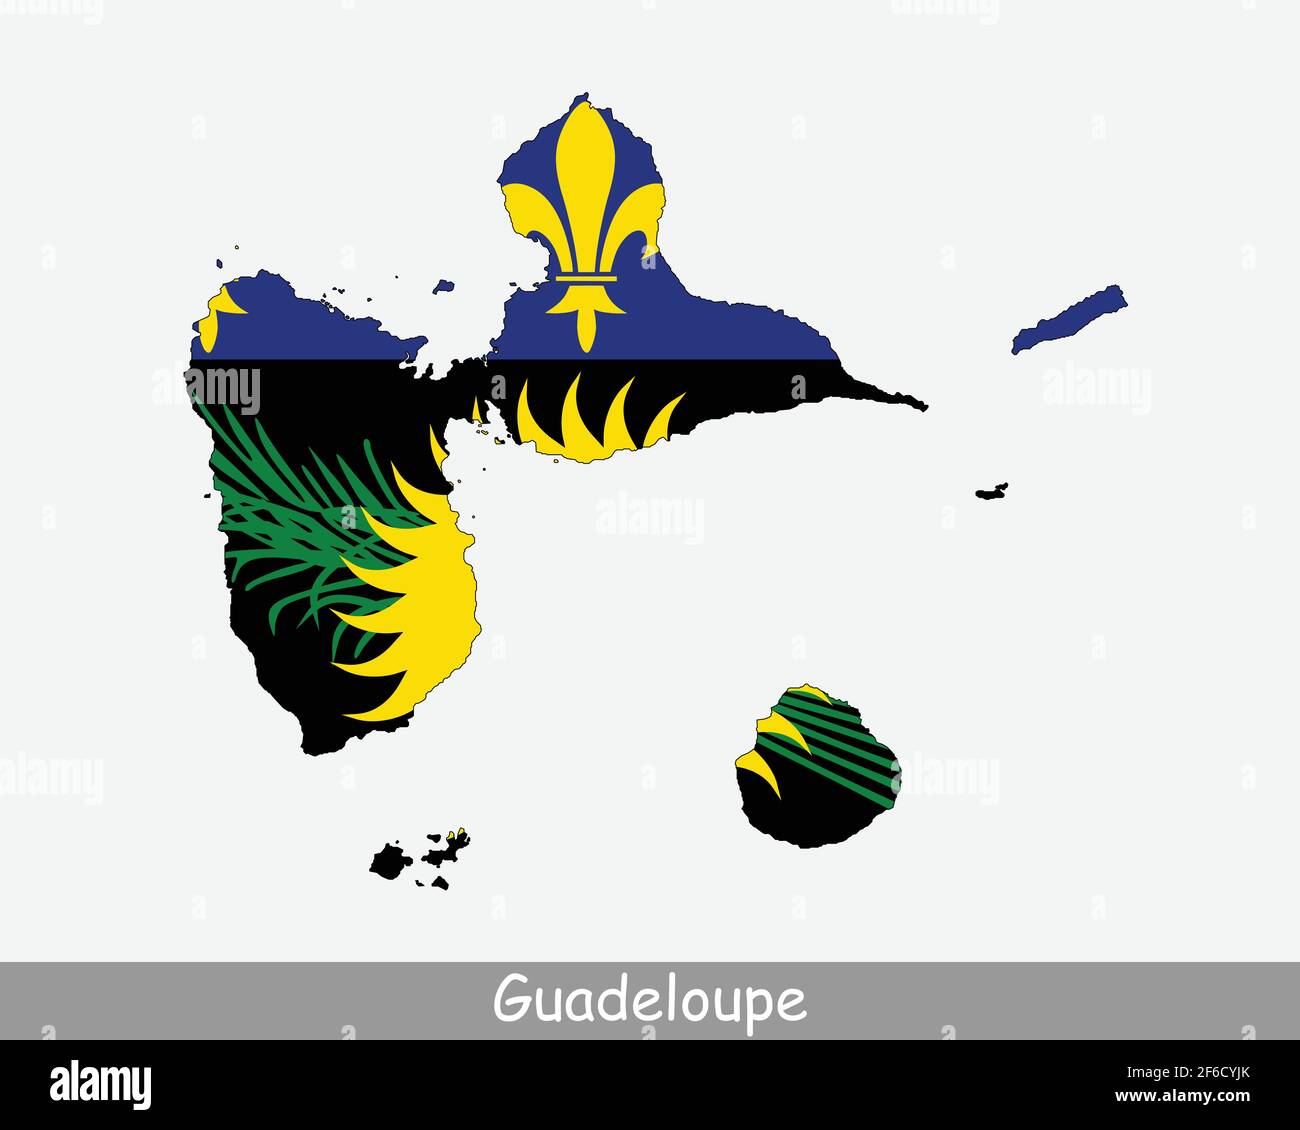 Guadeloupe flag, Overseas Territories of France - Stock